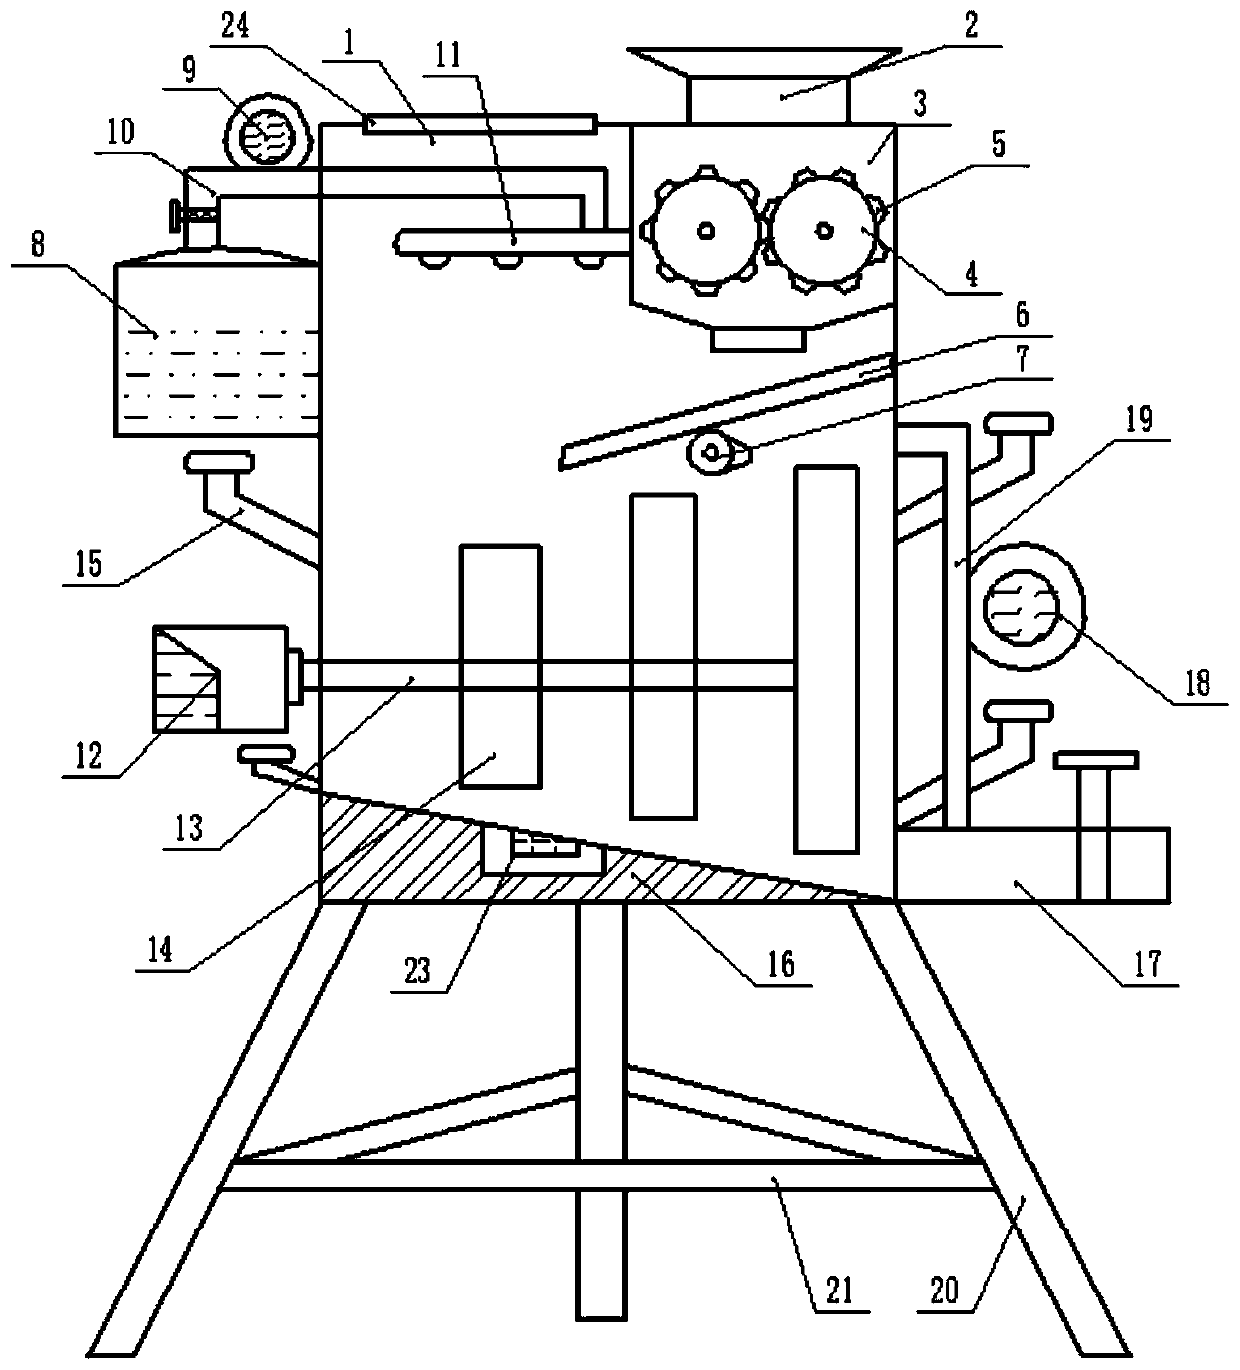 Safe preparation device for oil field water-based fracturing fluid